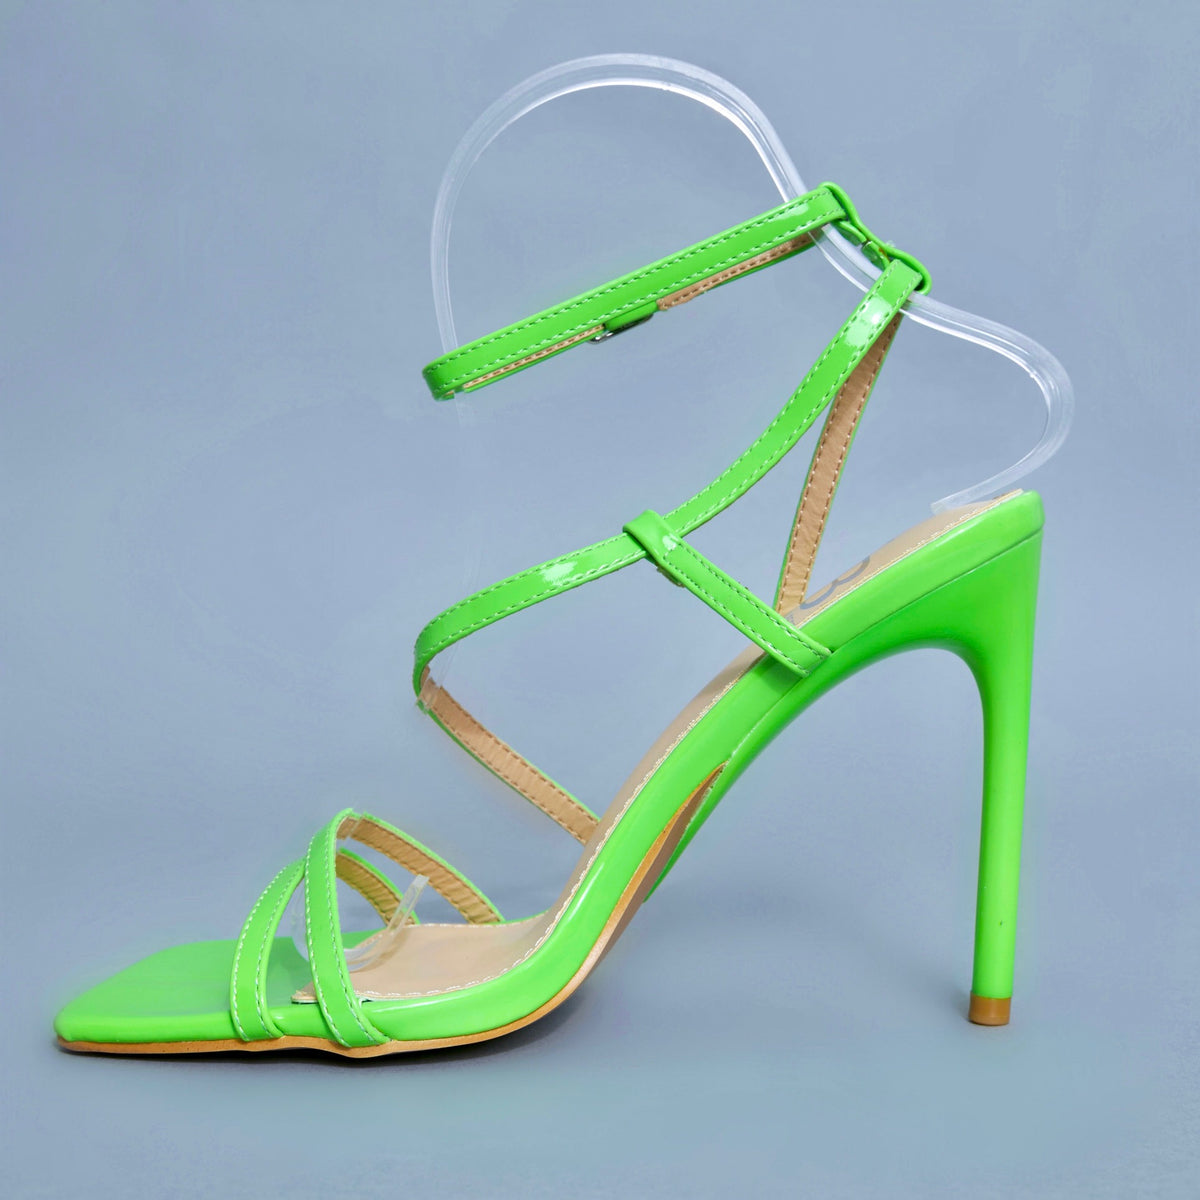 Juliette Green Strappy Square-Toe Heeled Sandals